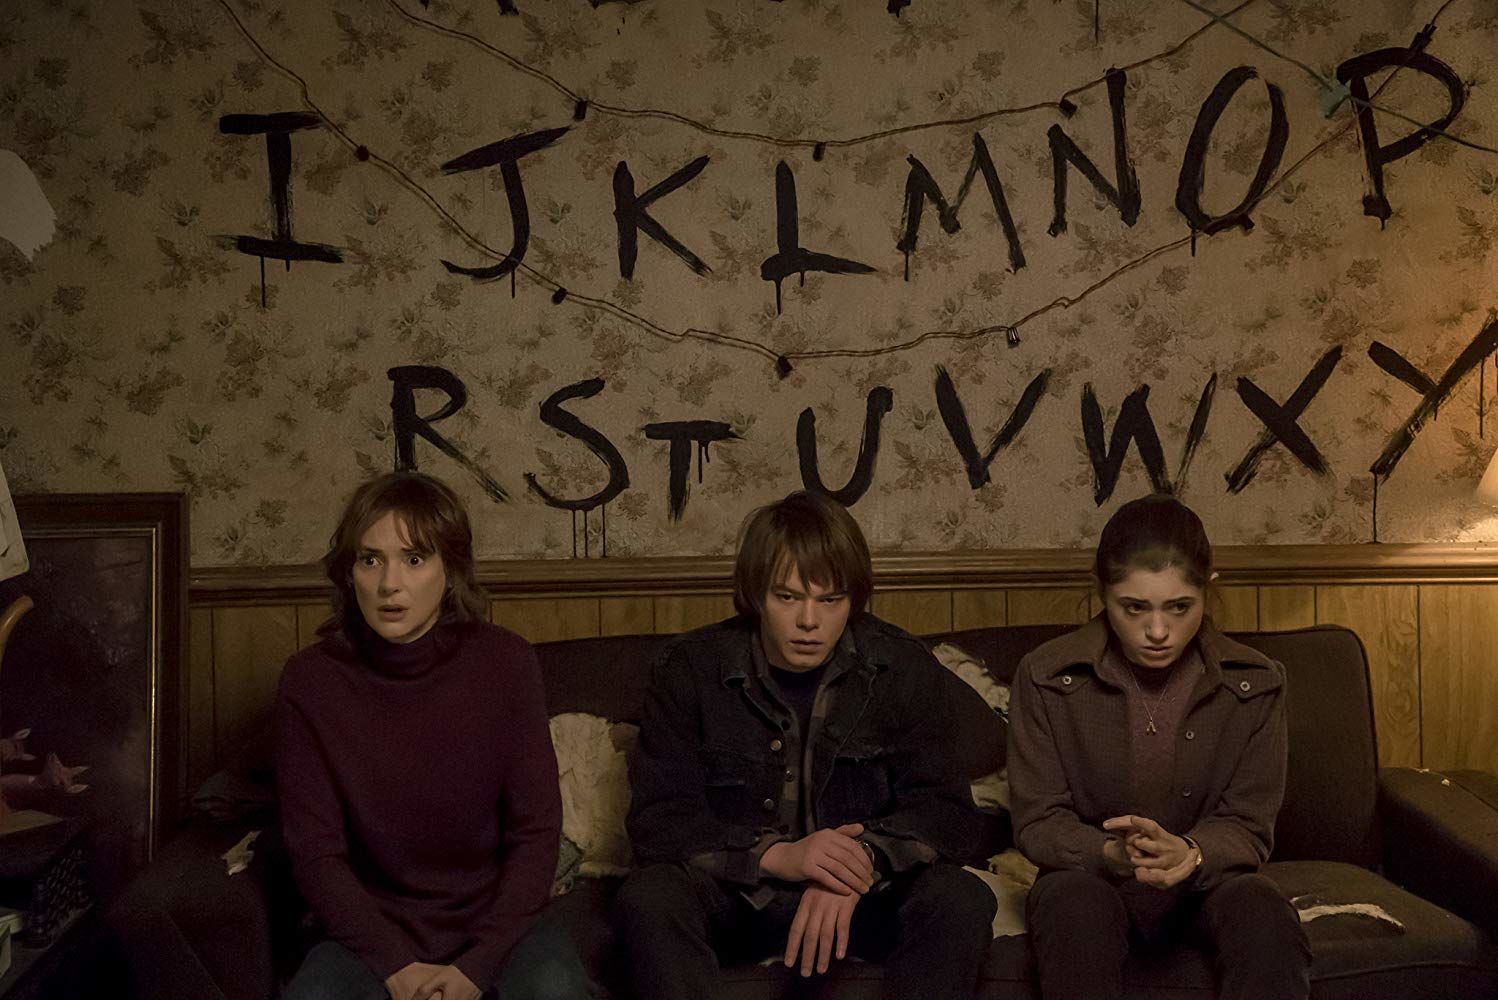 Stranger Things' living room replicated entirely by IKEA